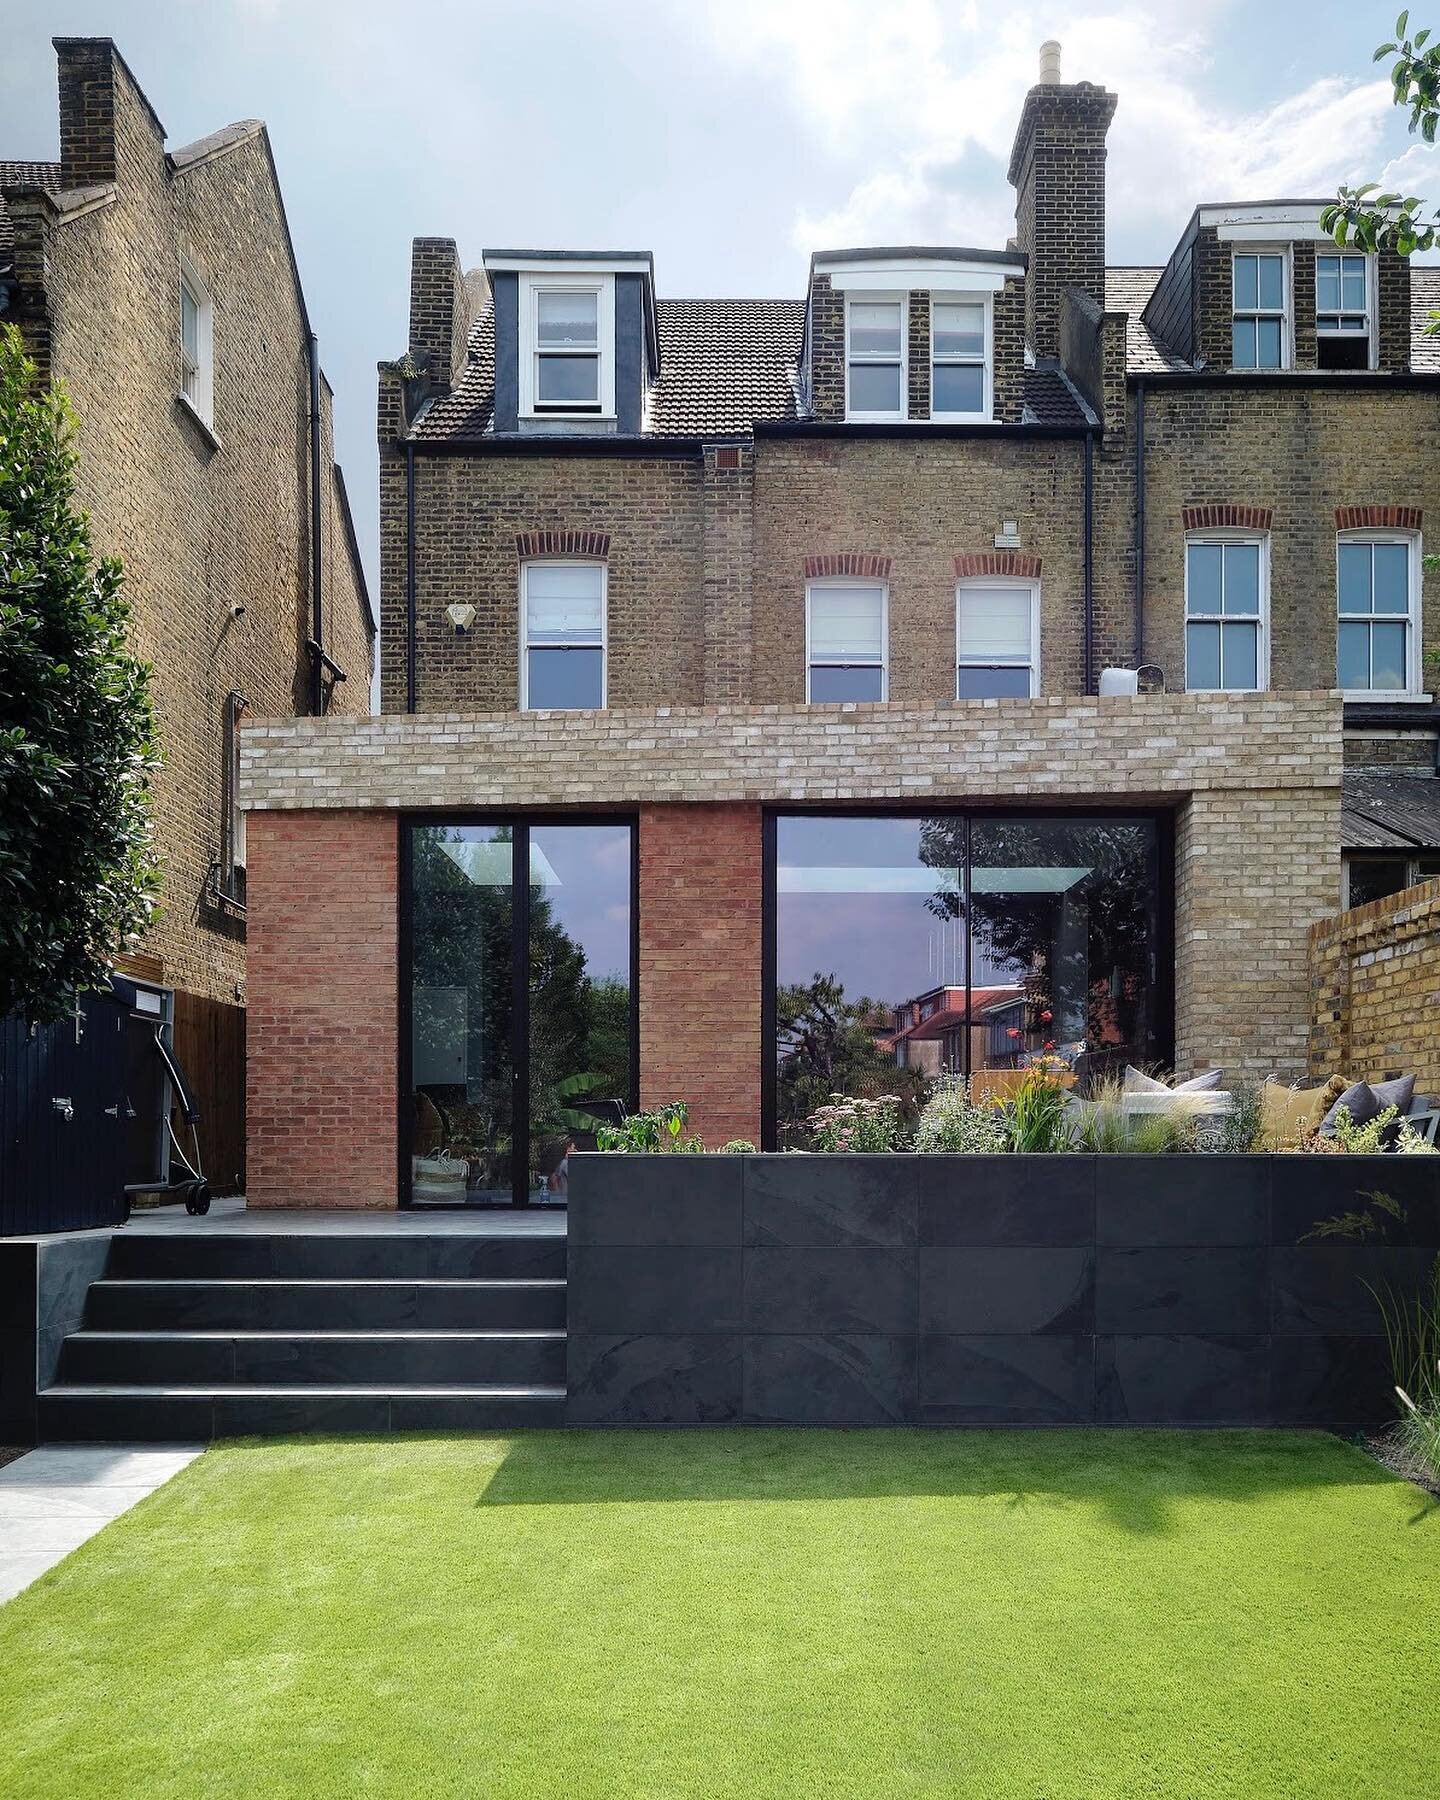 Love the clever, shifted planes to match the new extension to the neighbour's facades @abhr_a